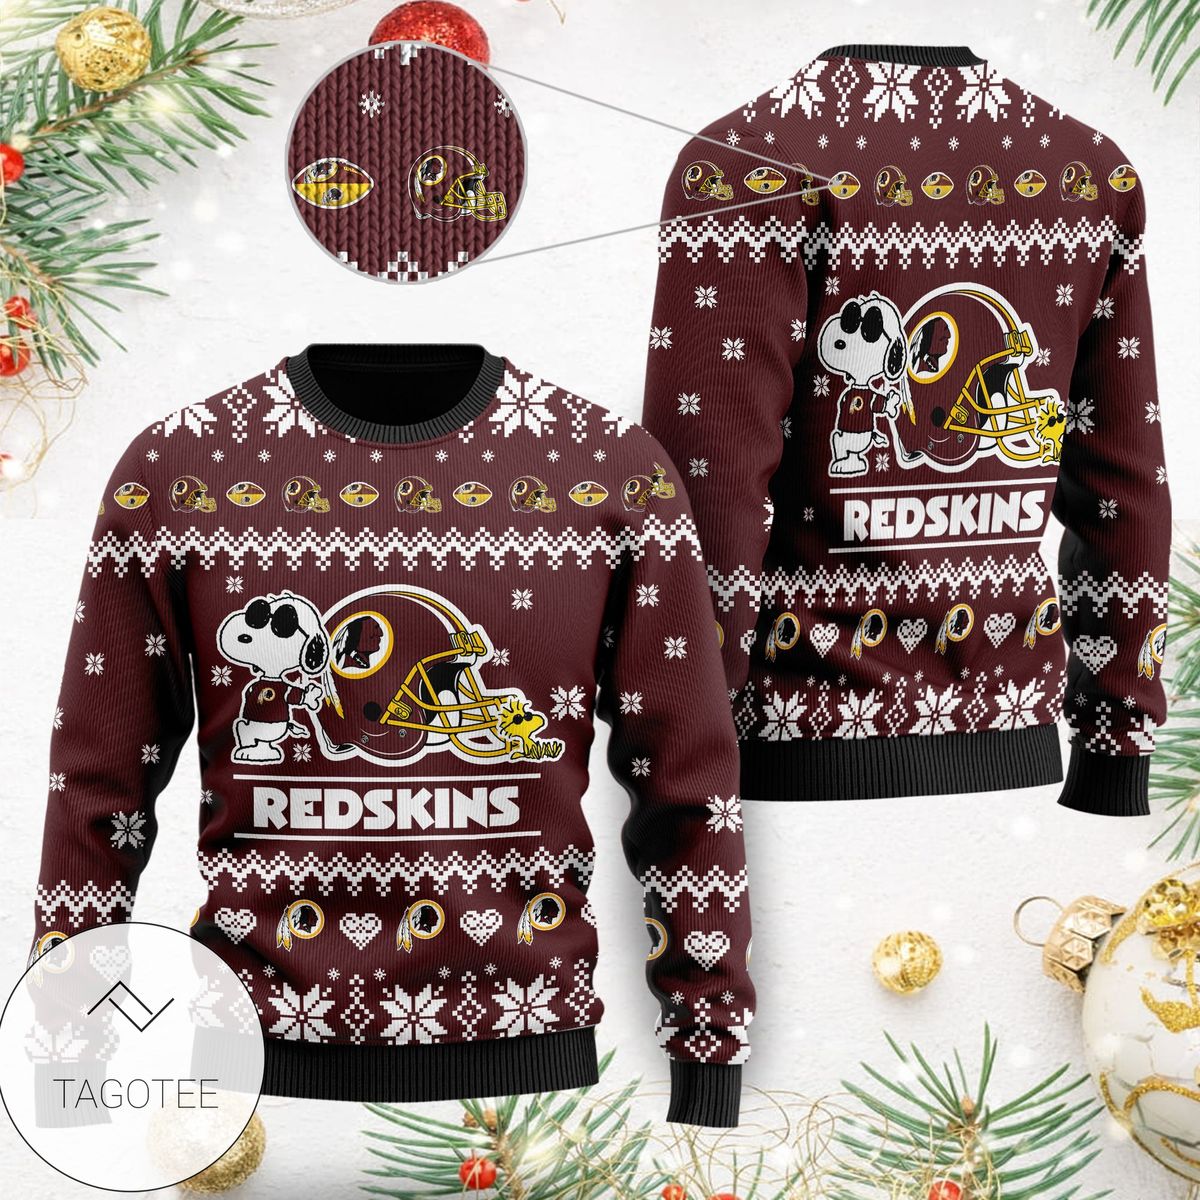 Washington Redskins Cute The Snoopy Show Football Helmet 3D All Over Print Ugly Sweater Shirt